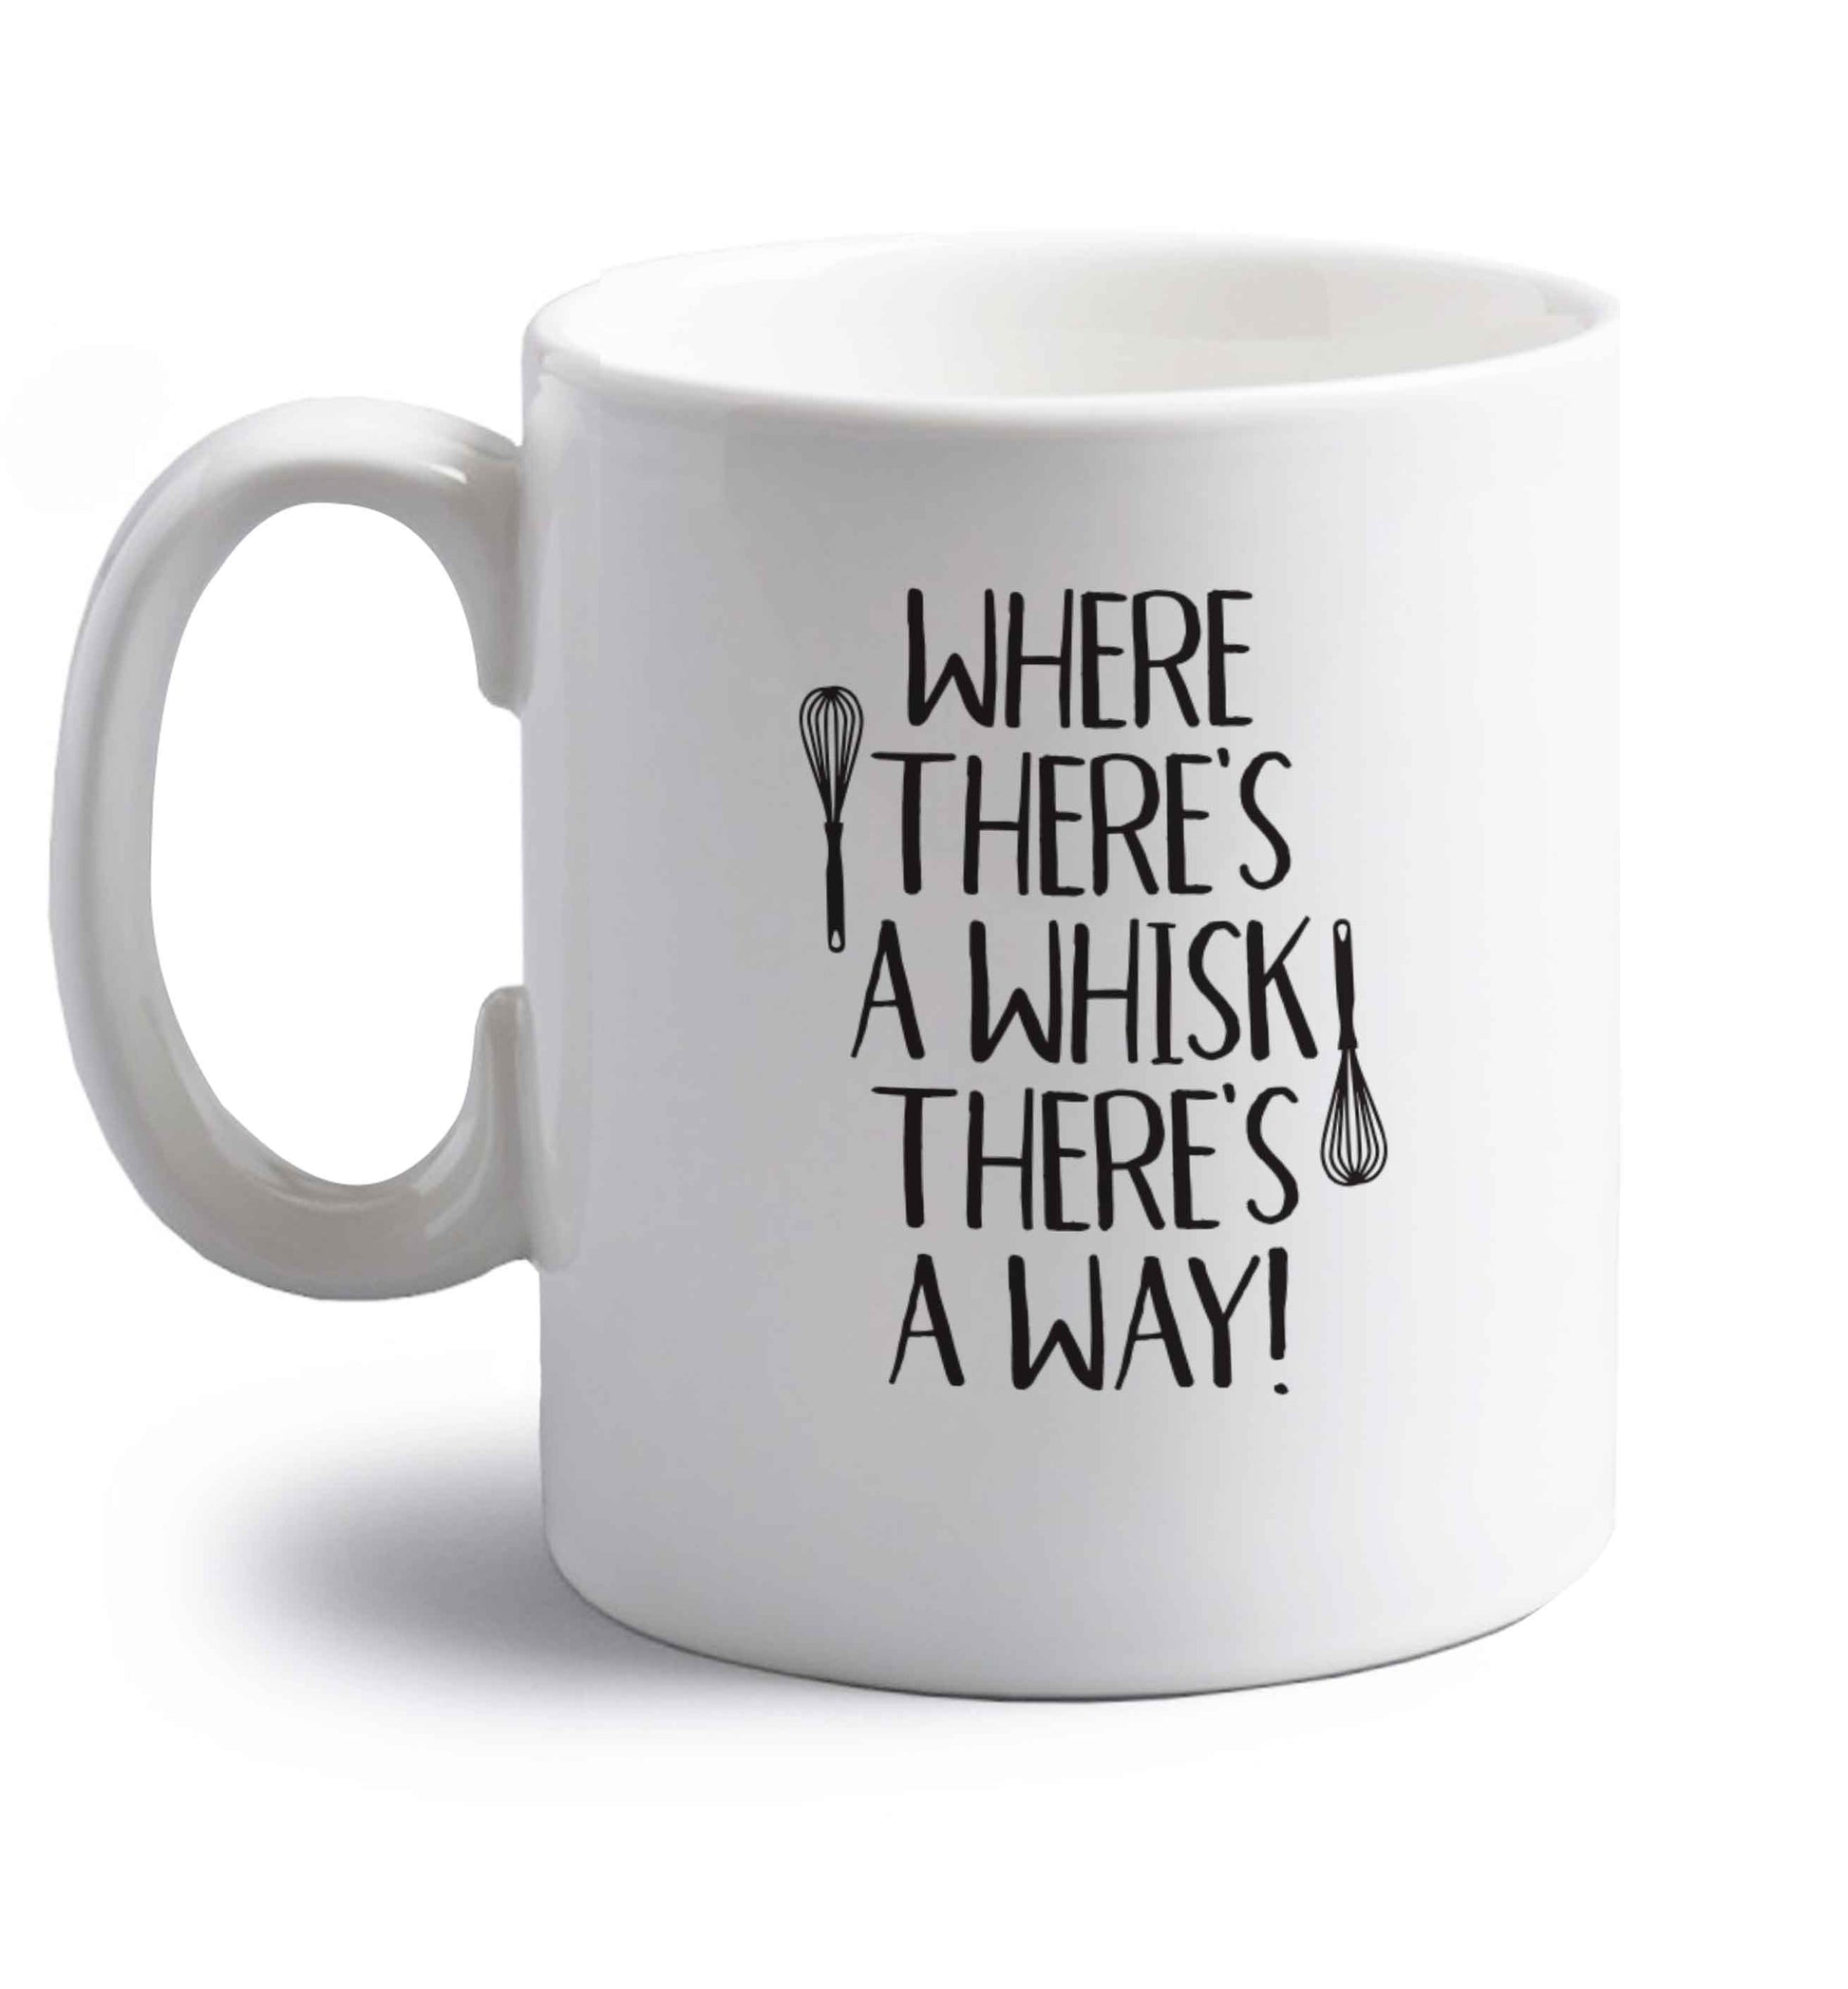 Where there's a whisk there's a way right handed white ceramic mug 